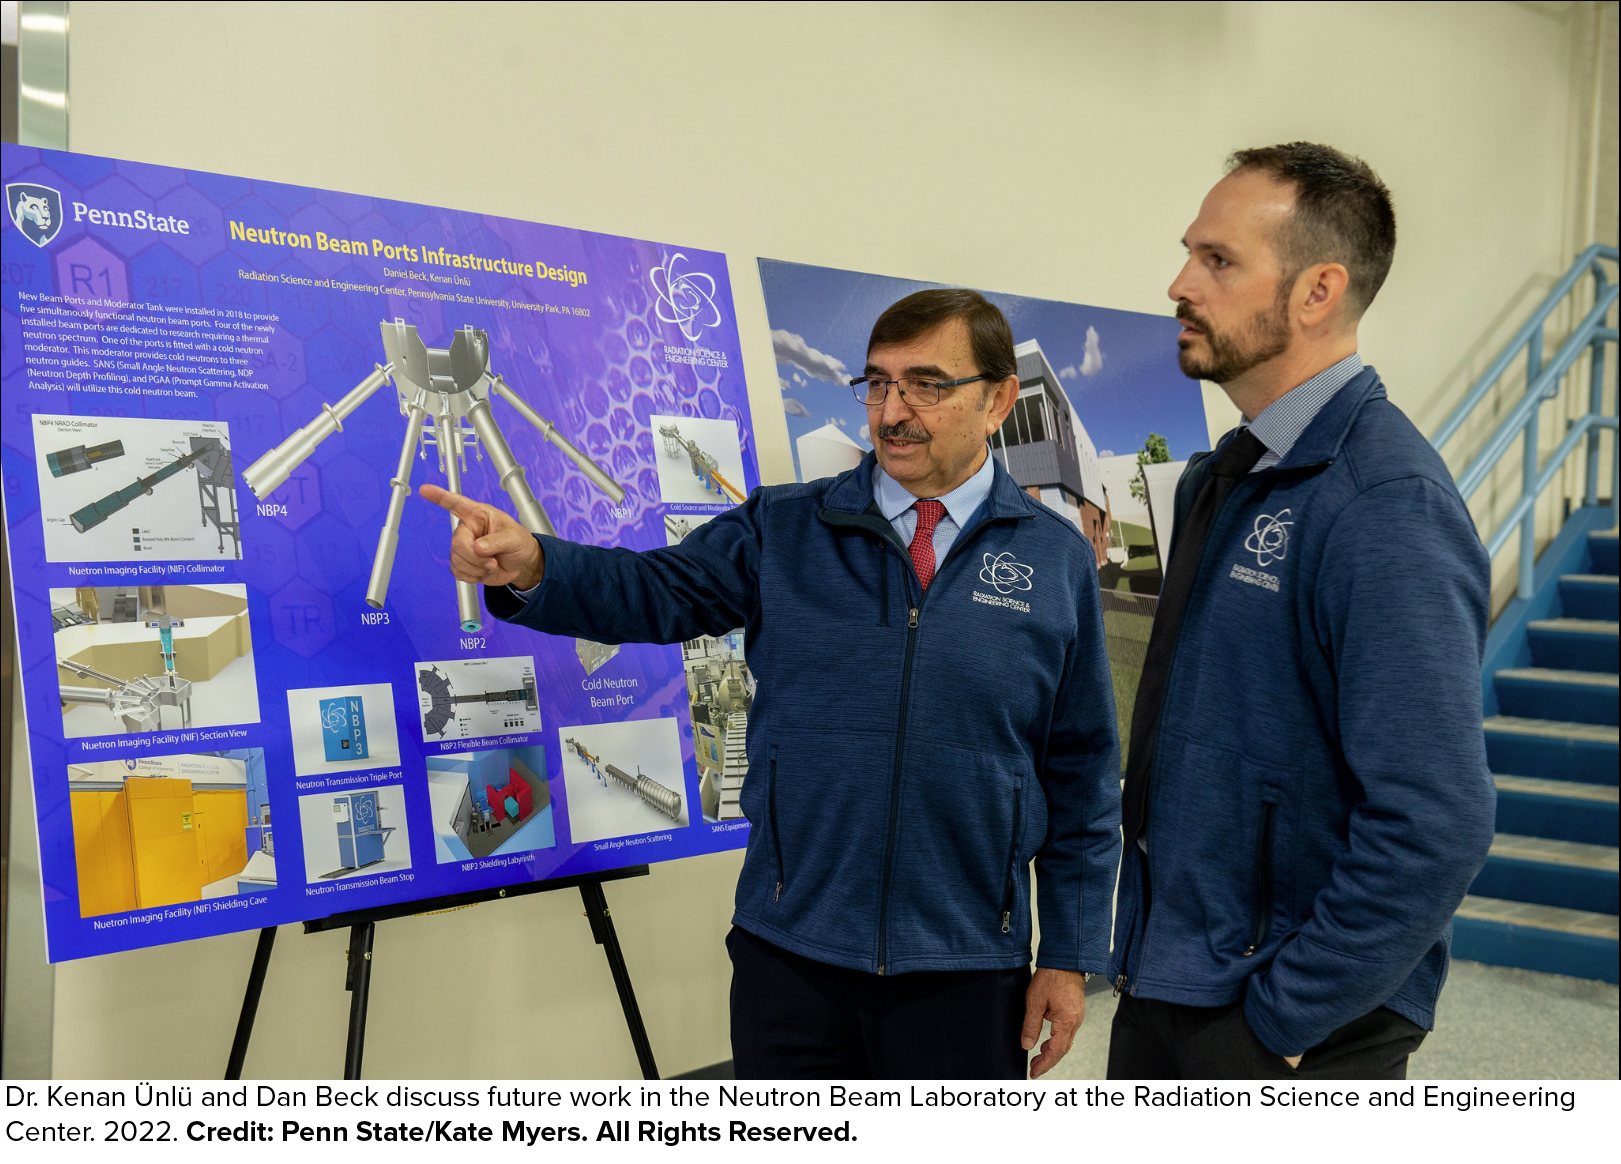 Dr. Kenan Unlu and Dan Beck discuss future work in the Neutron Beam Laboratory at the Radiation Science and Engineering Center 